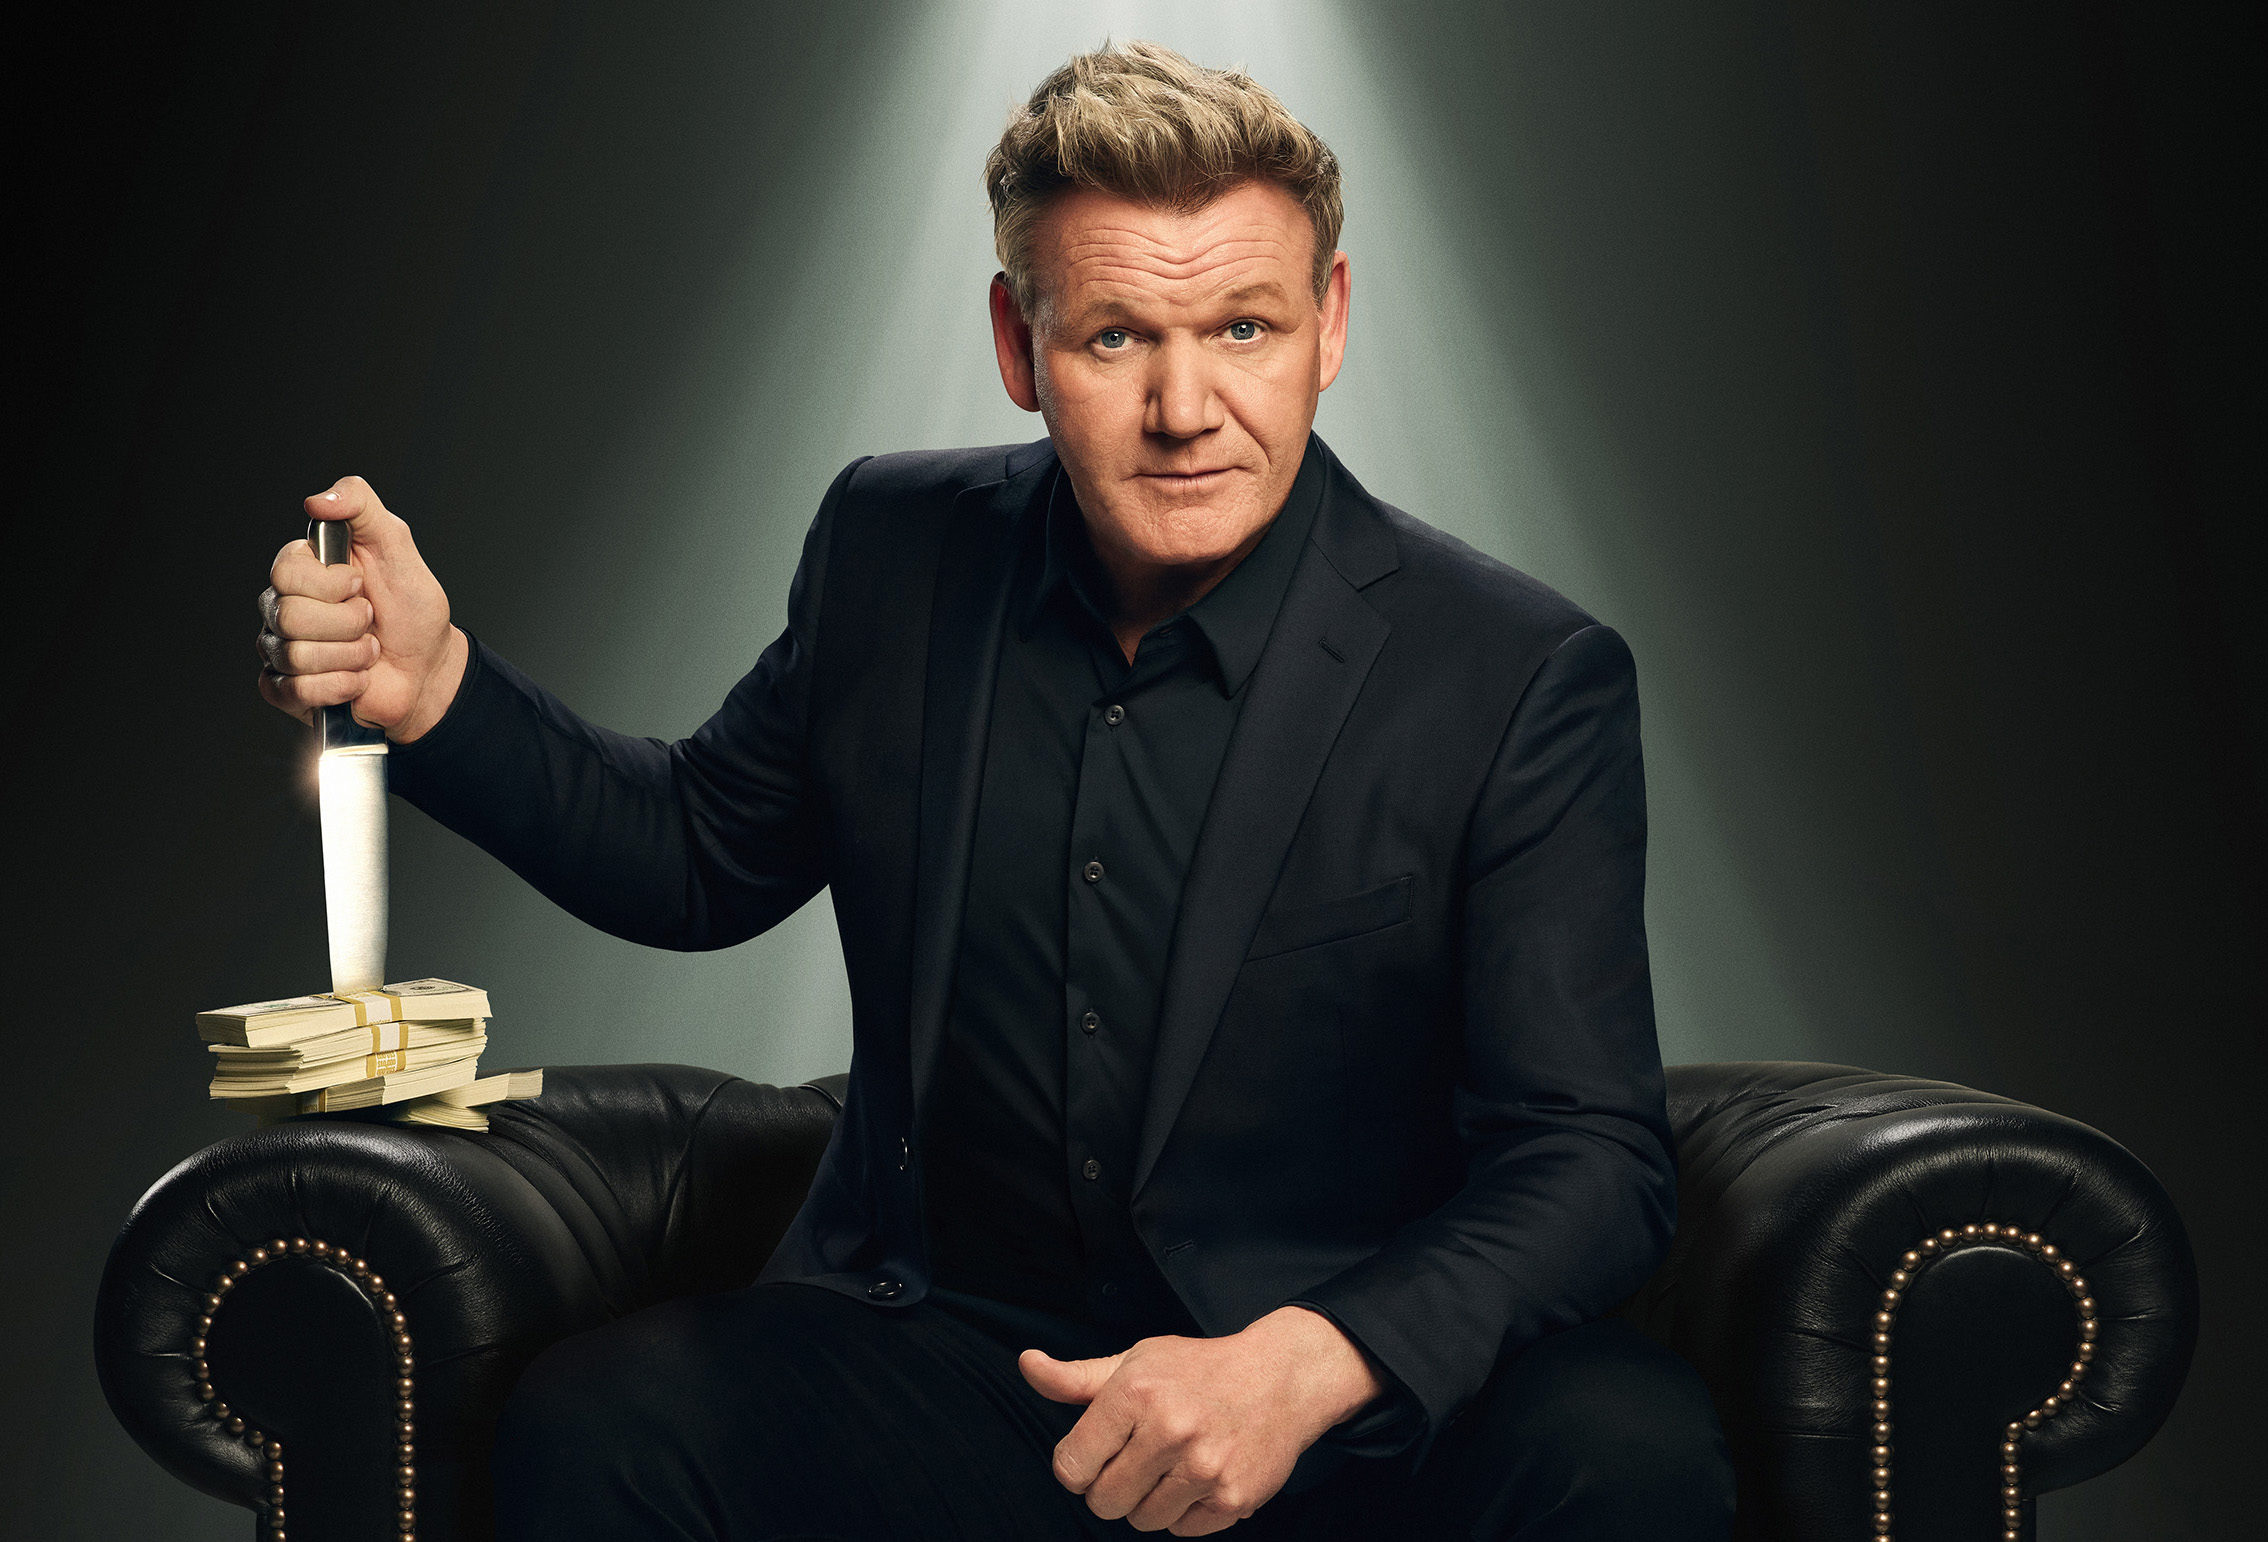 #Gordon Ramsay’s Food Stars: Season Two Preview Released for FOX Competition Series